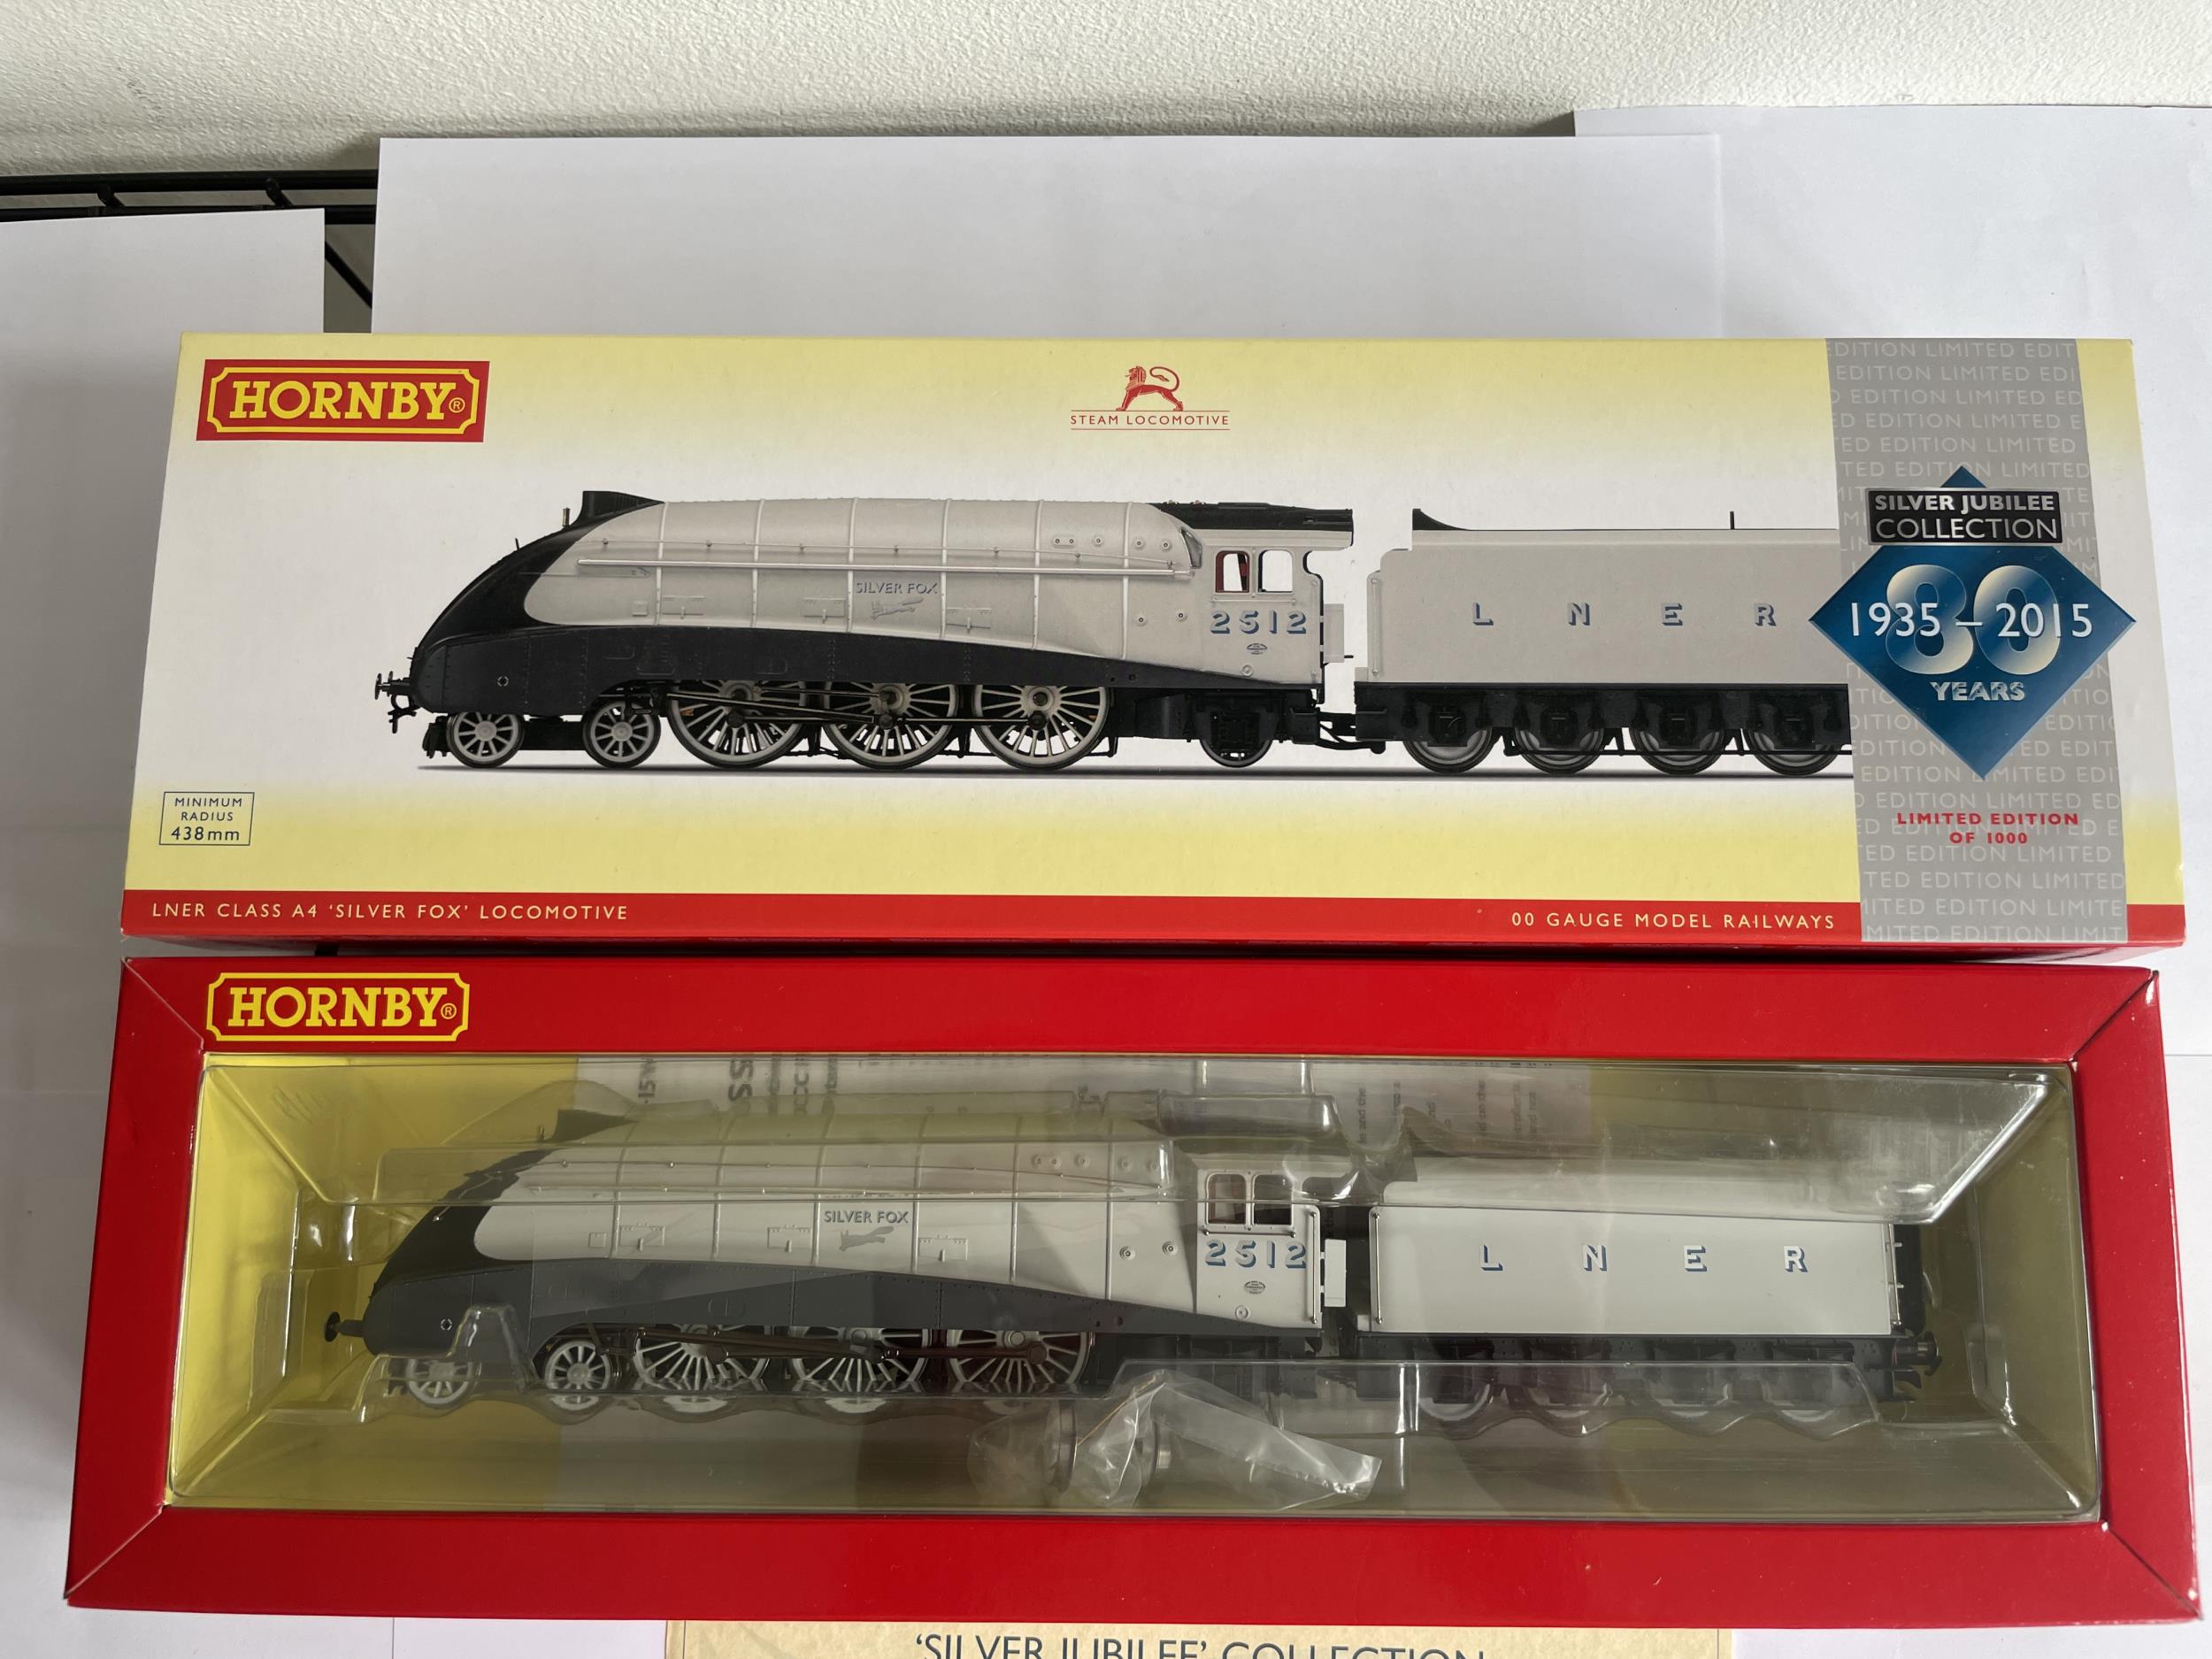 A BOXED HORNBY 00 GAUGE LIMITED EDITION OF 1000 SILVER JUBILEE COLLECTION LNER CLASS A4 SILVER FOX - Image 2 of 4